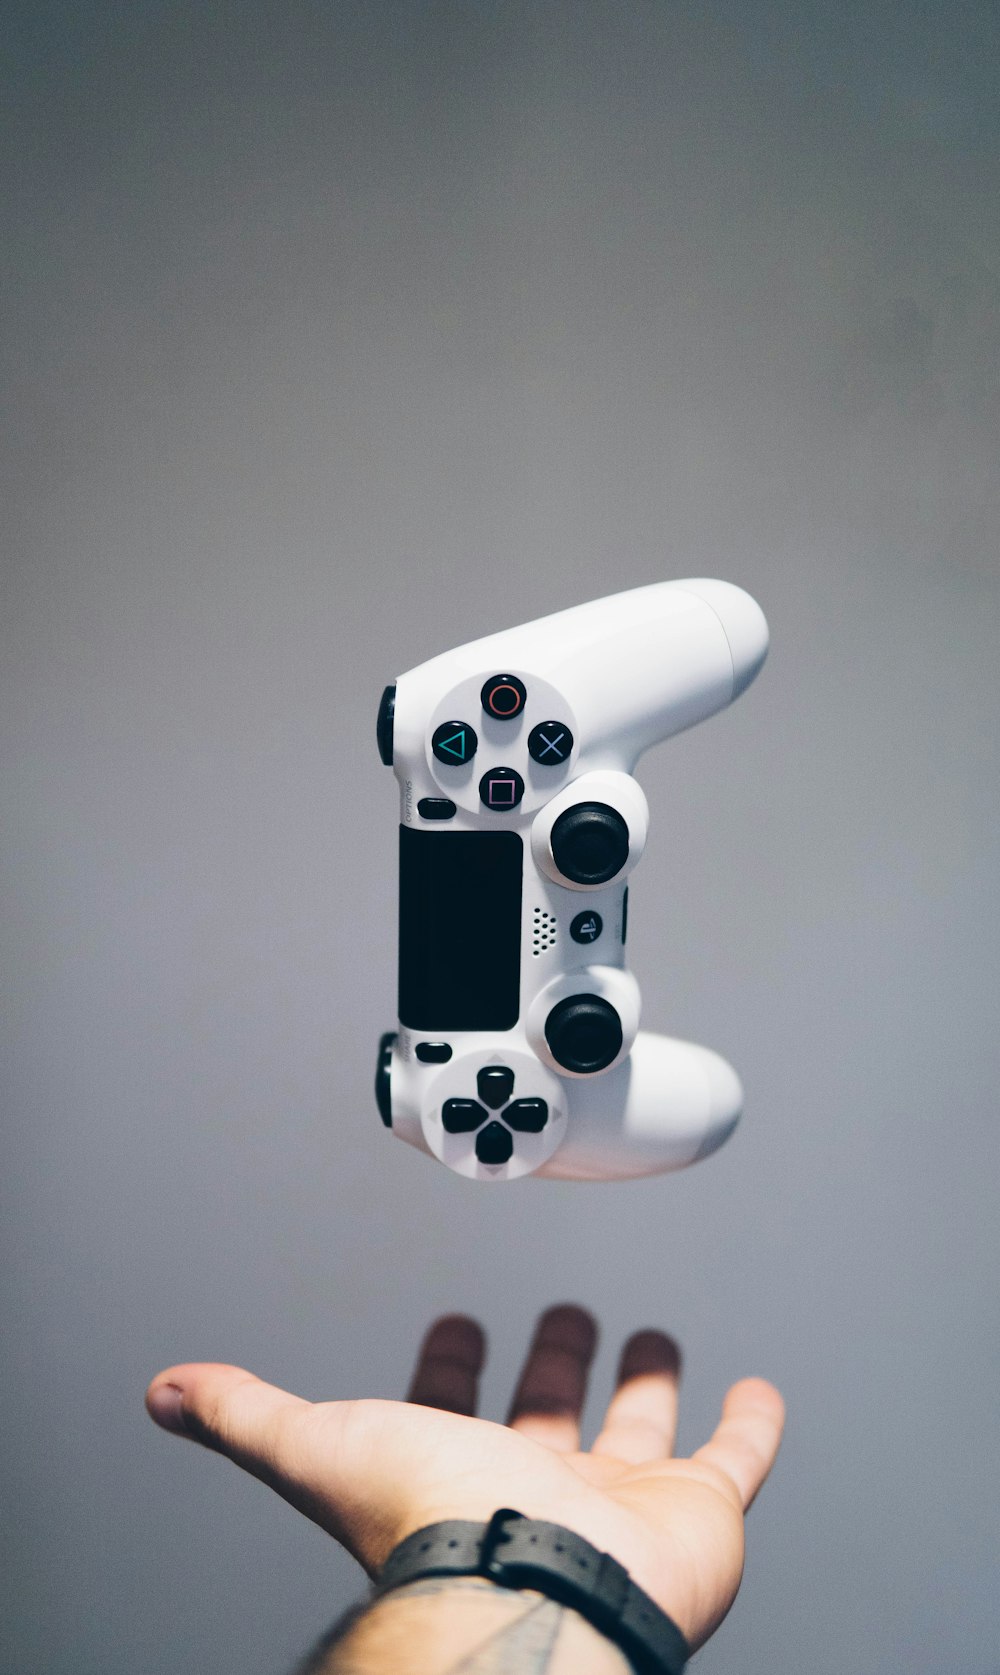 Playstation 5 Pictures | Download Free Images on Unsplash